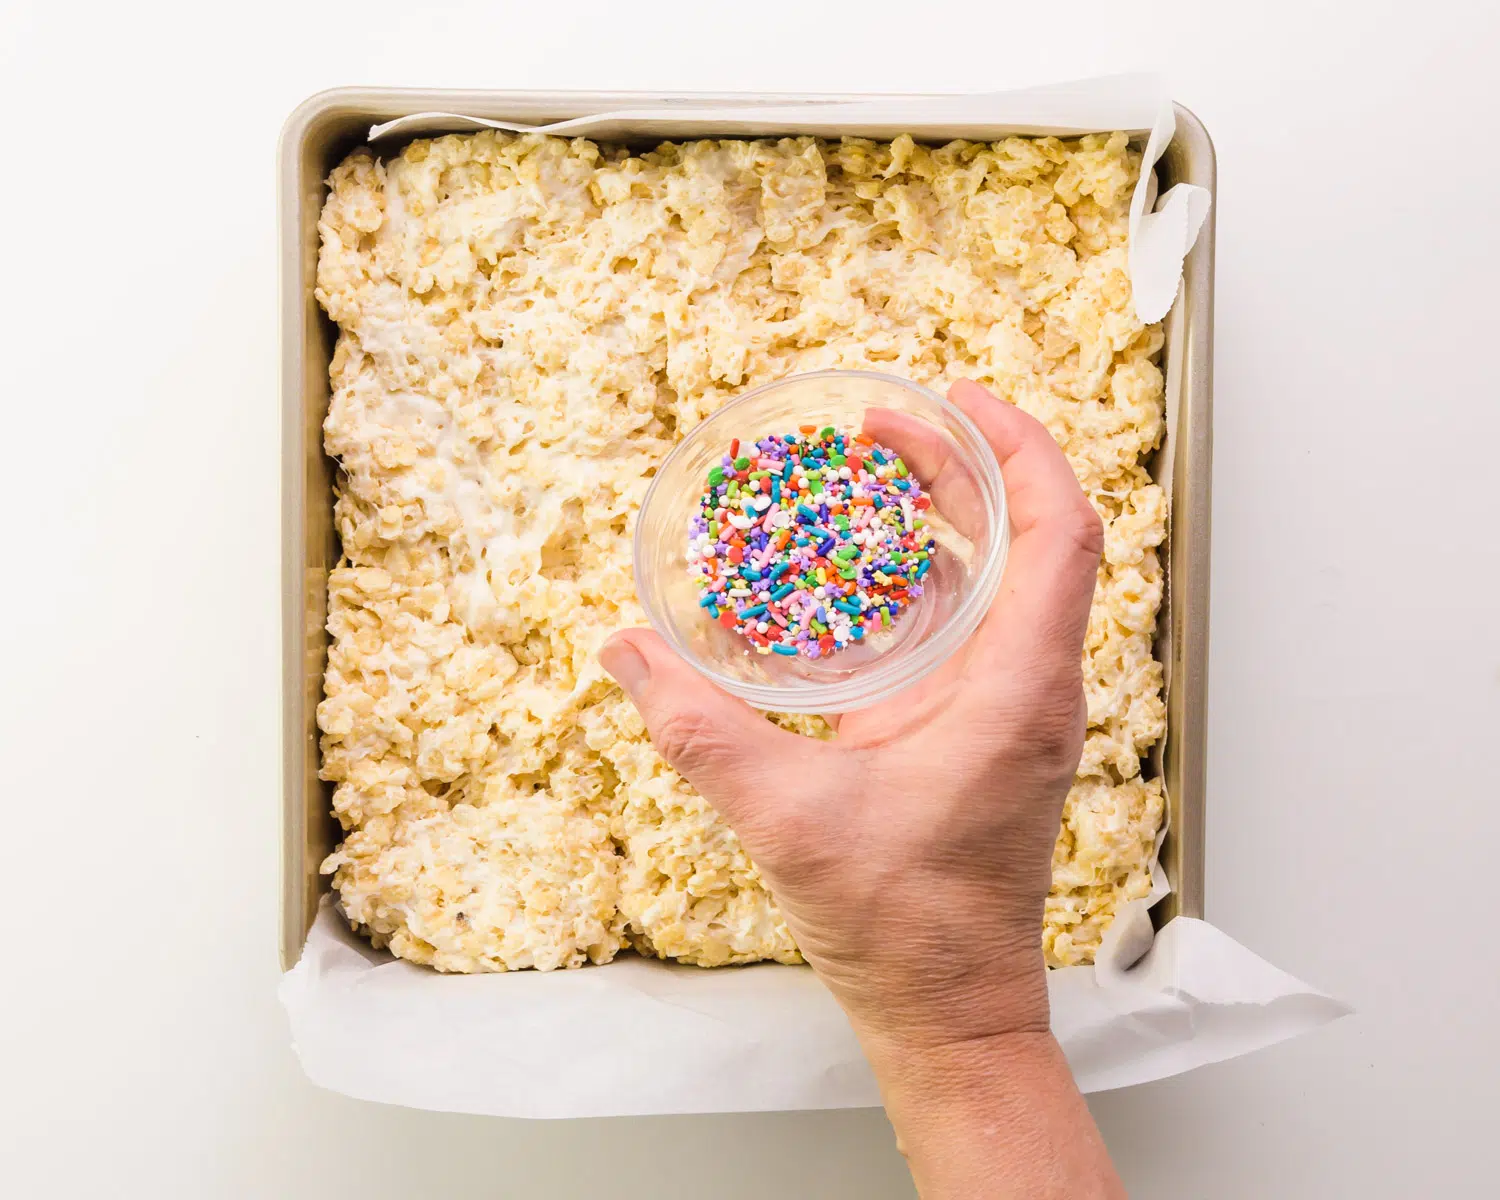 A hand holds a bowl of sprinkles over vegan Rice Krispies in a pan.